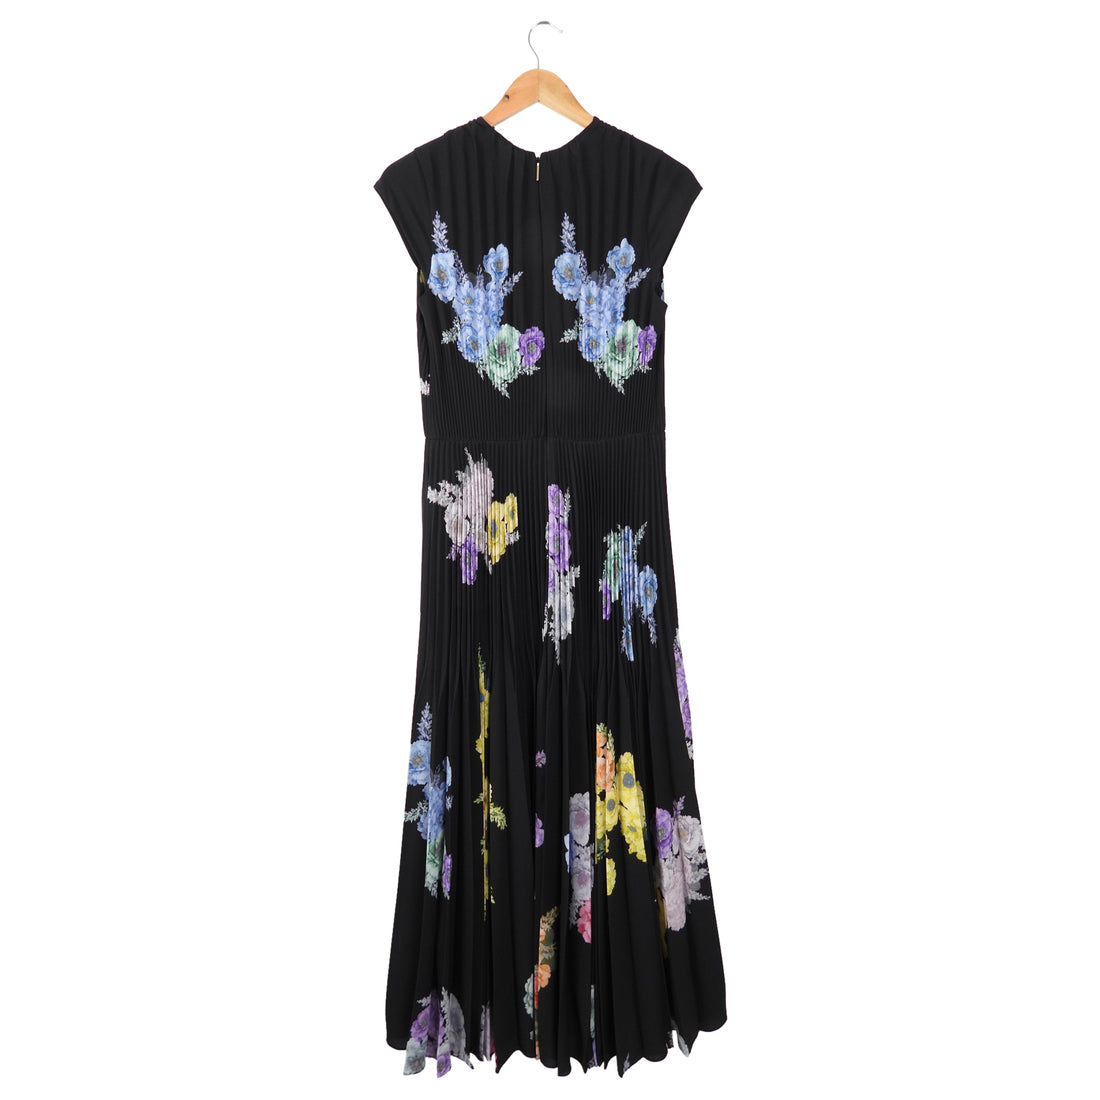 Jason Wu Collection Black and Multi Floral Knife Pleat Long Dress - S (6)